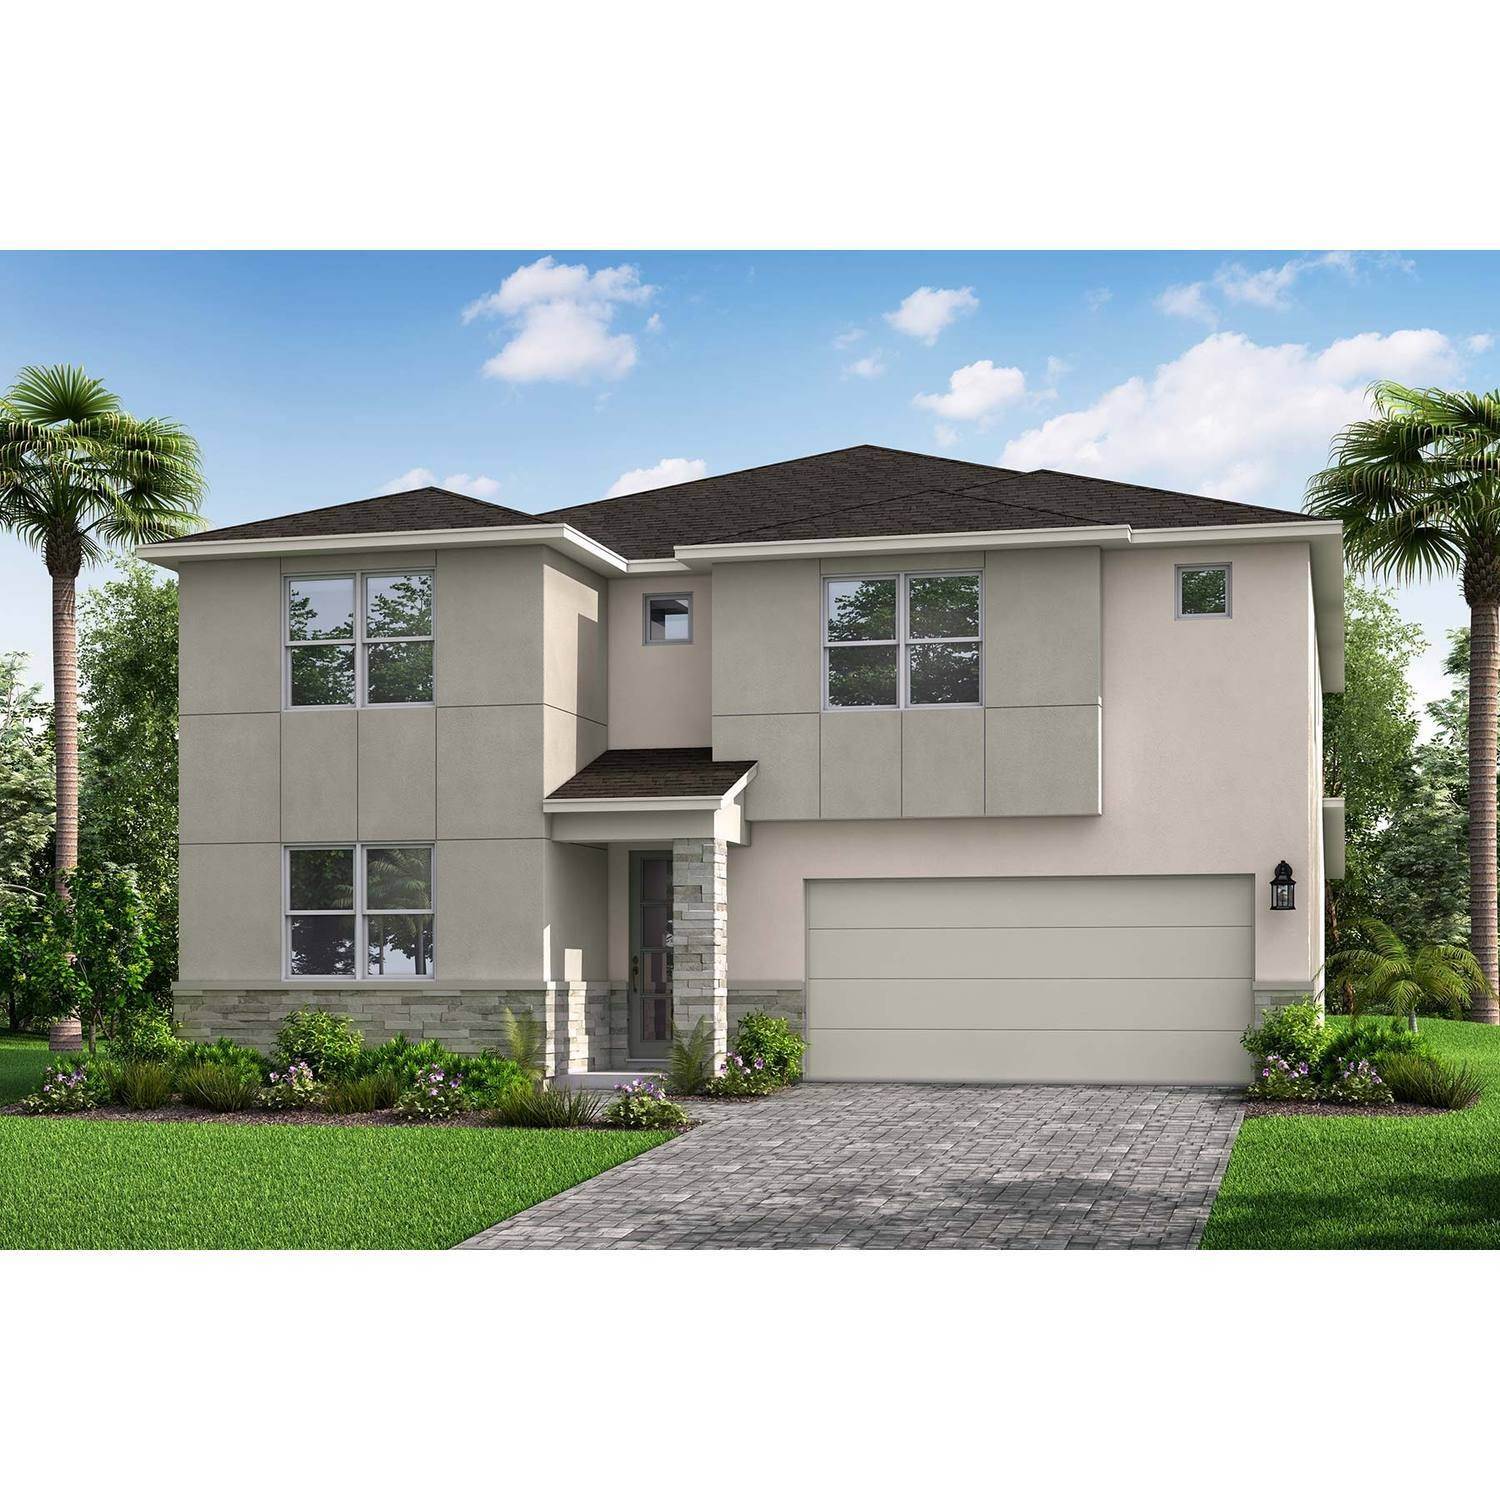 Single Family for Sale at Lutz, FL 33558